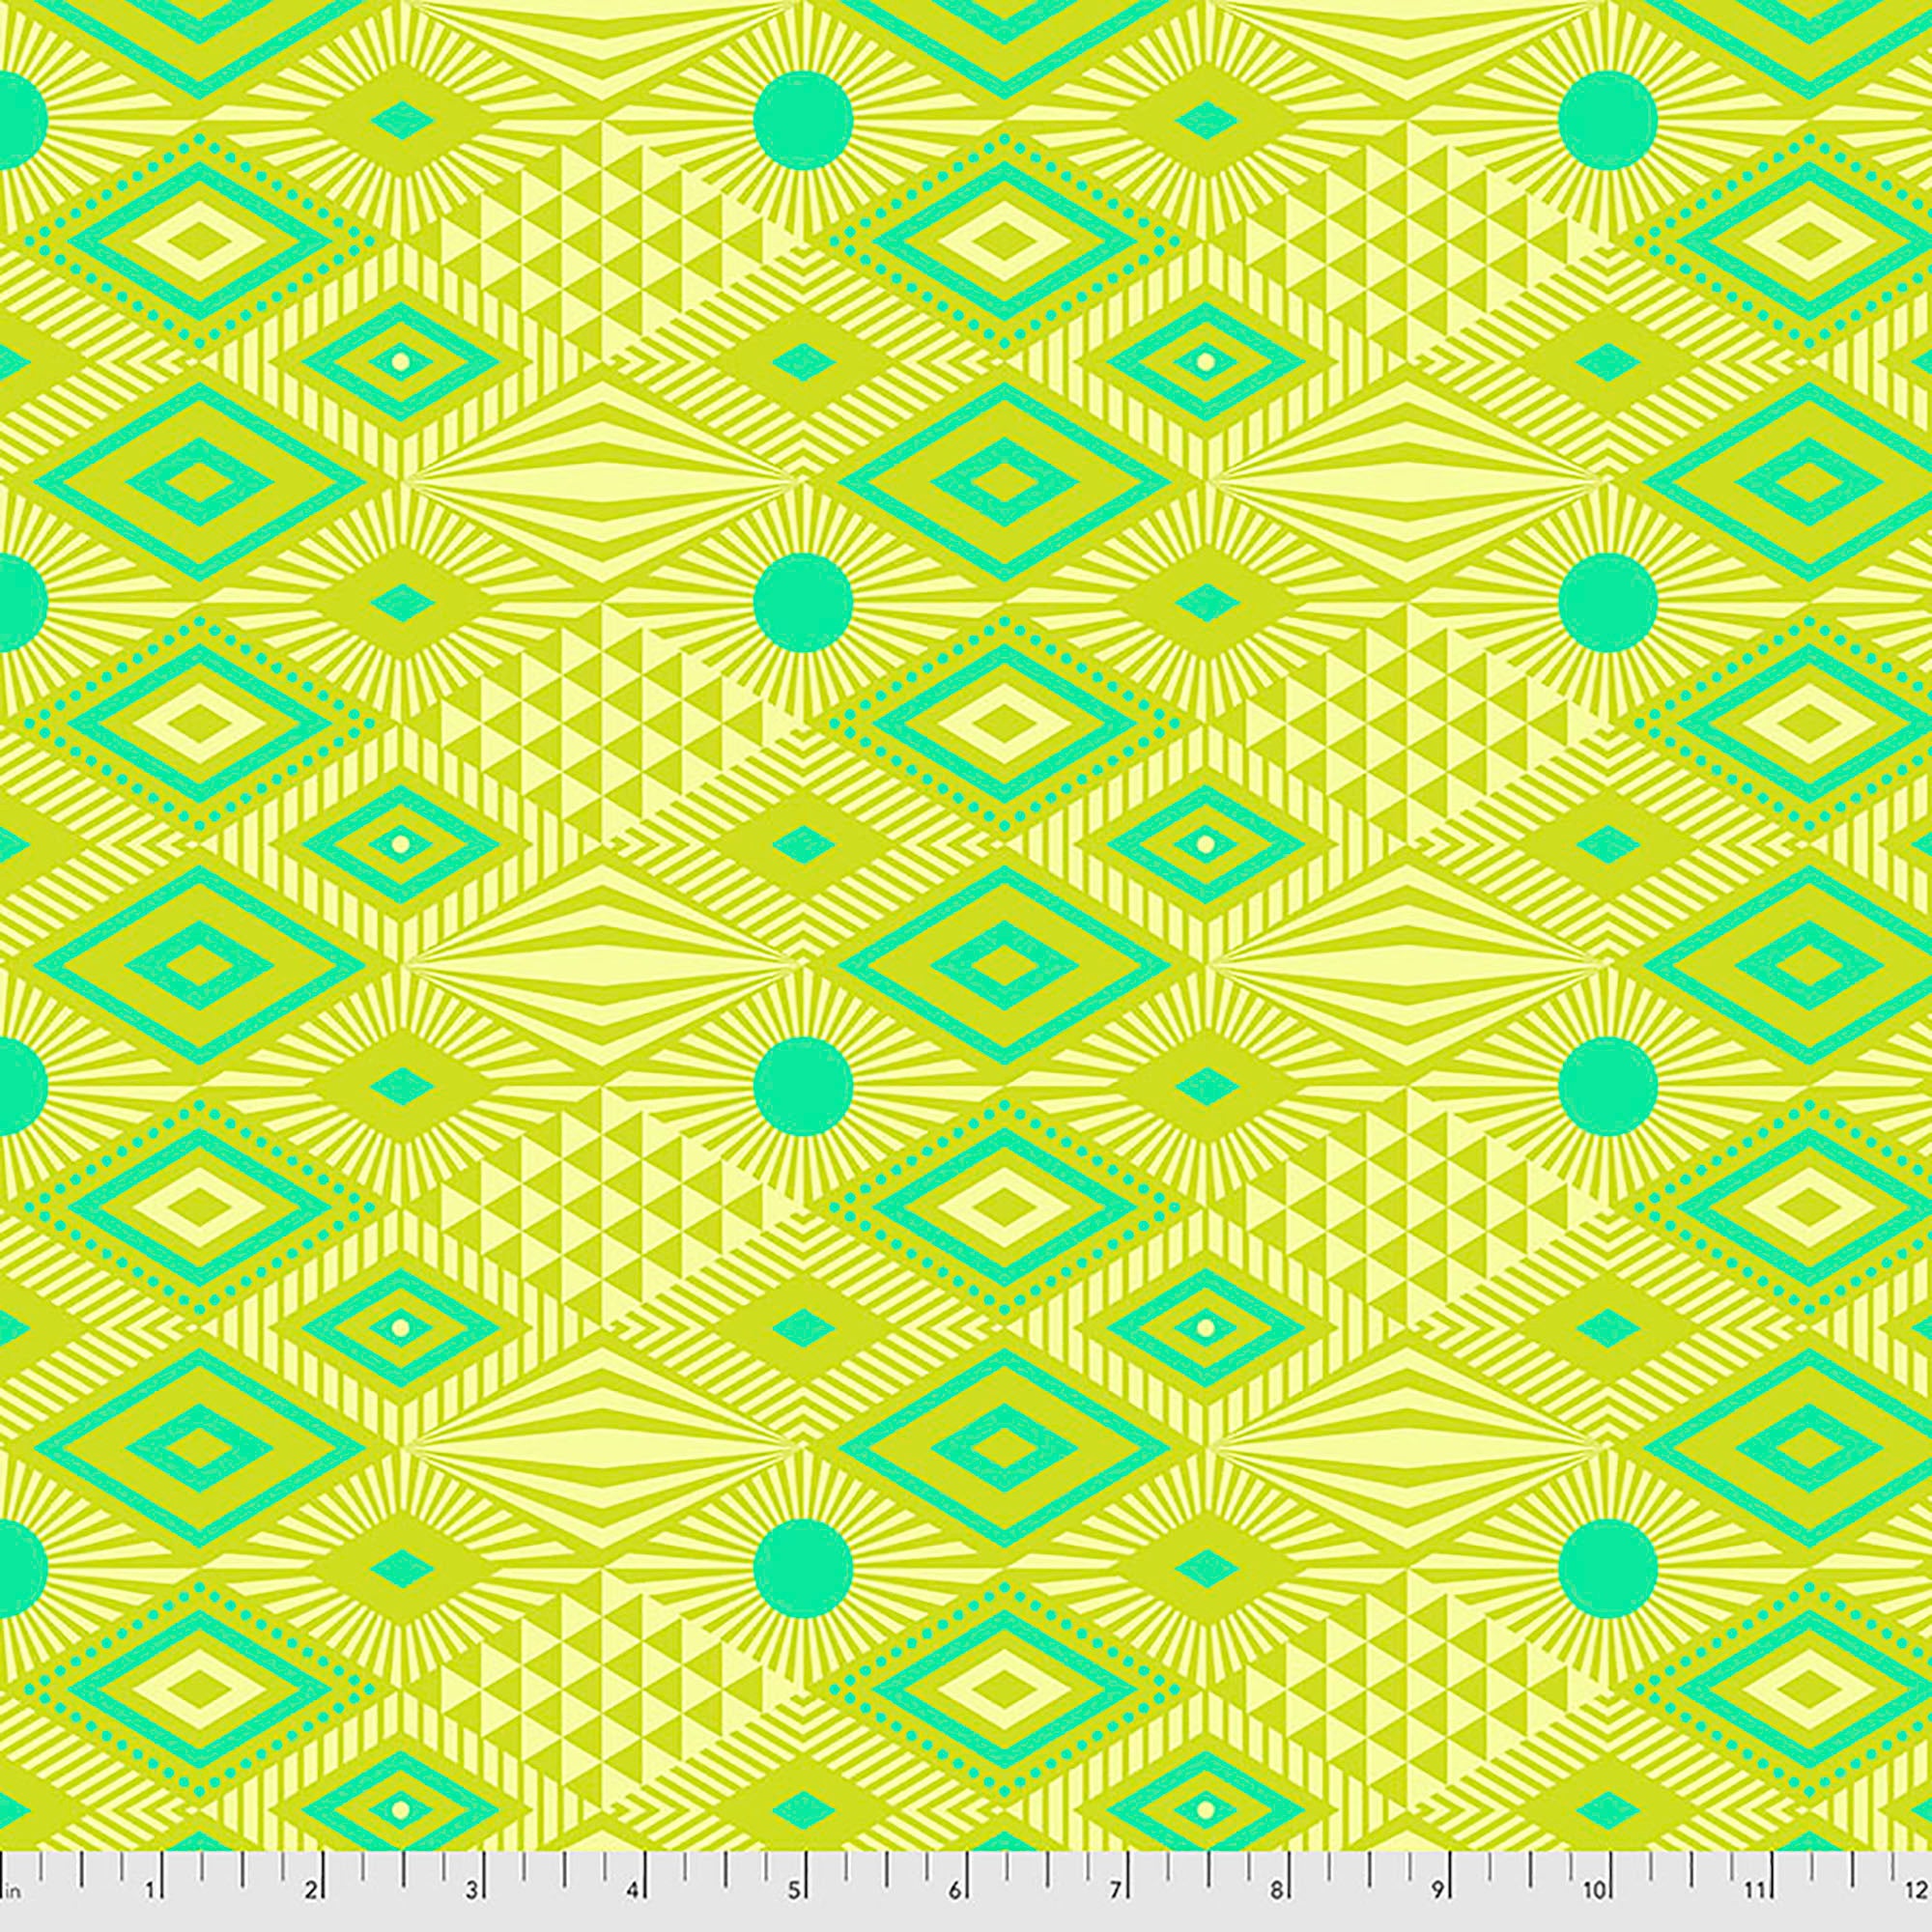 Daydreamer - Lucy - Pineapple Fabric